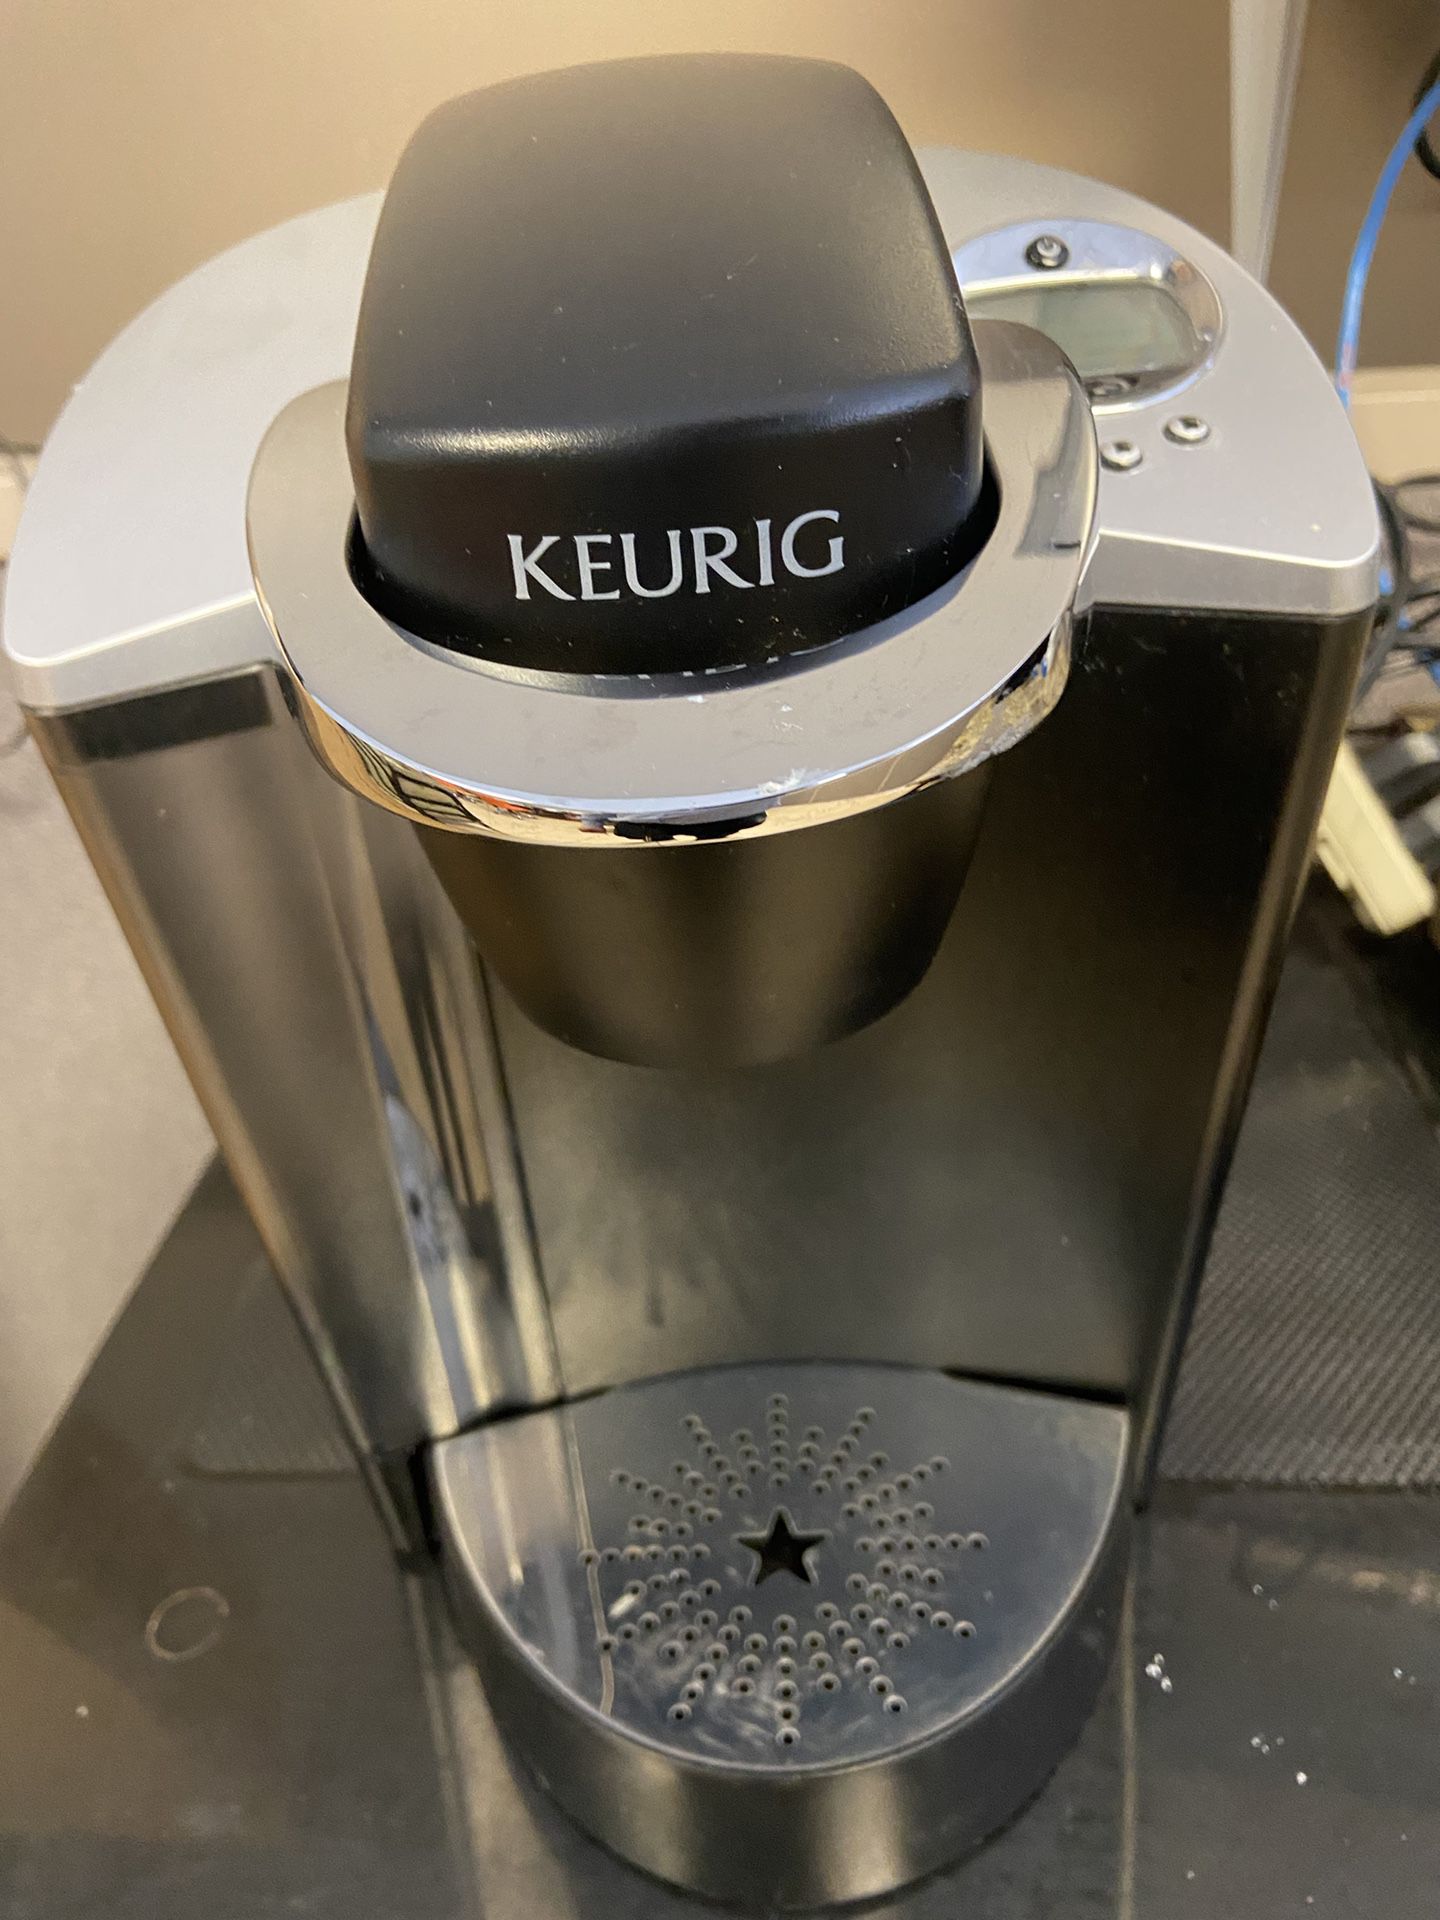 Keurig Coffee Maker Machine For Only $58